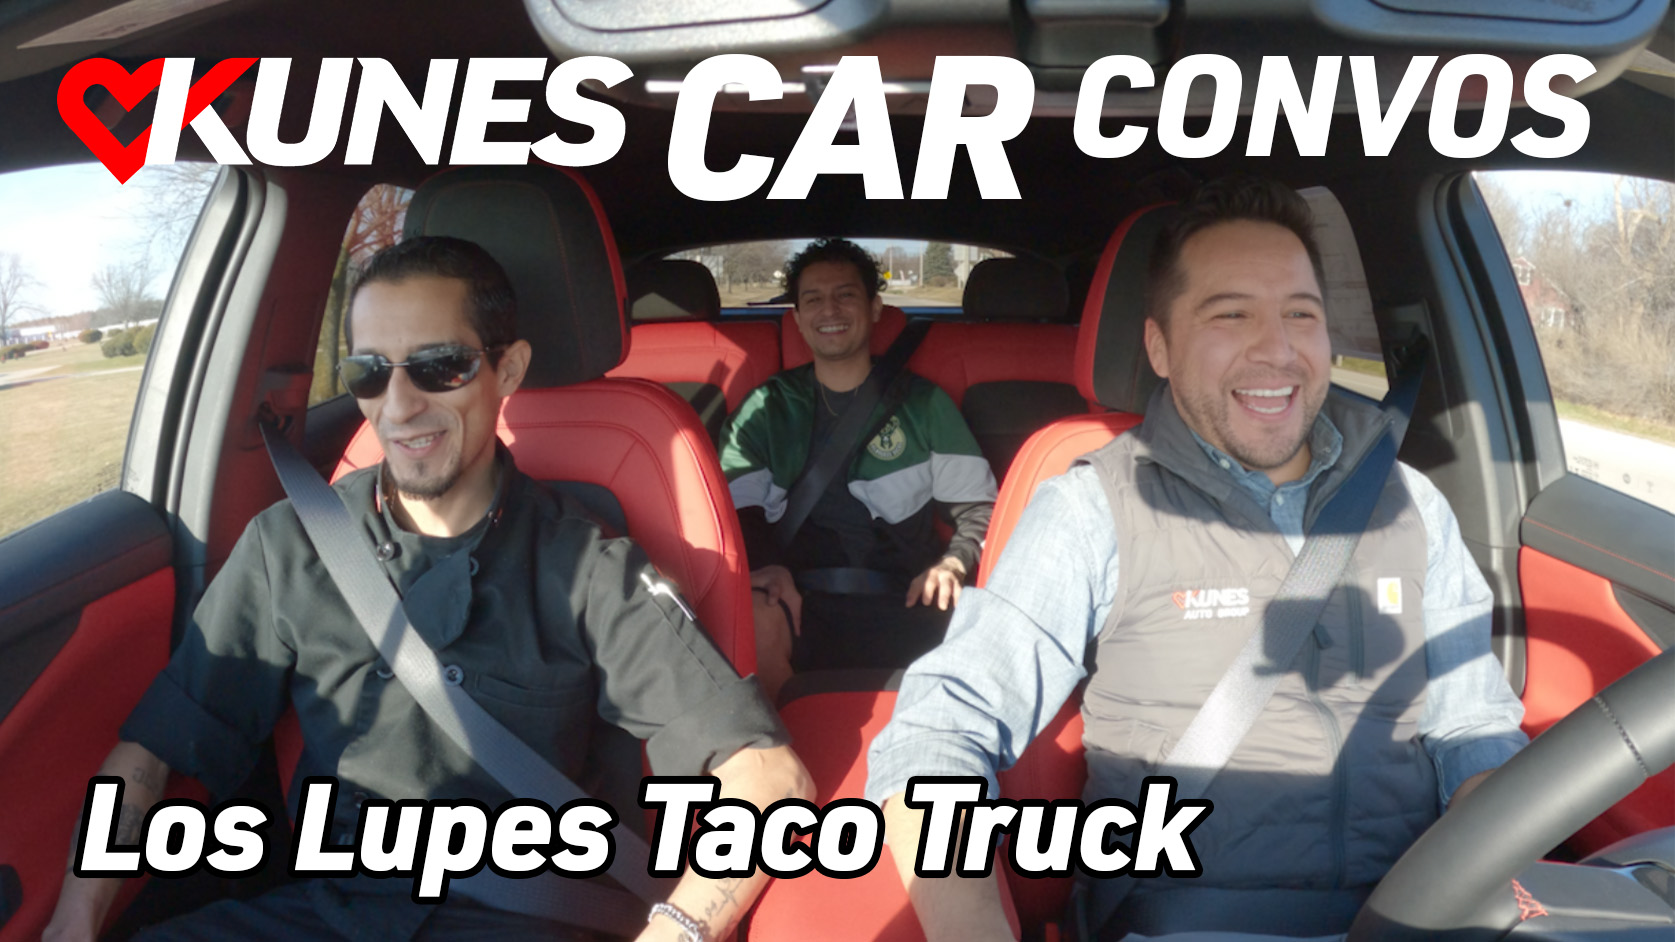 Image: Josue "Josh" Hernandez and Moises Hernandez, from Los Lupes Tacos Truck, and driver Jesse Jaramillo, General Manager at Kunes Chevrolet GMC of Elkhorn, WI, pictured inside of a 2024 Chevy Blazer EV RS. Text reads: Kunes Car Convos; Los Lupes Taco Truck